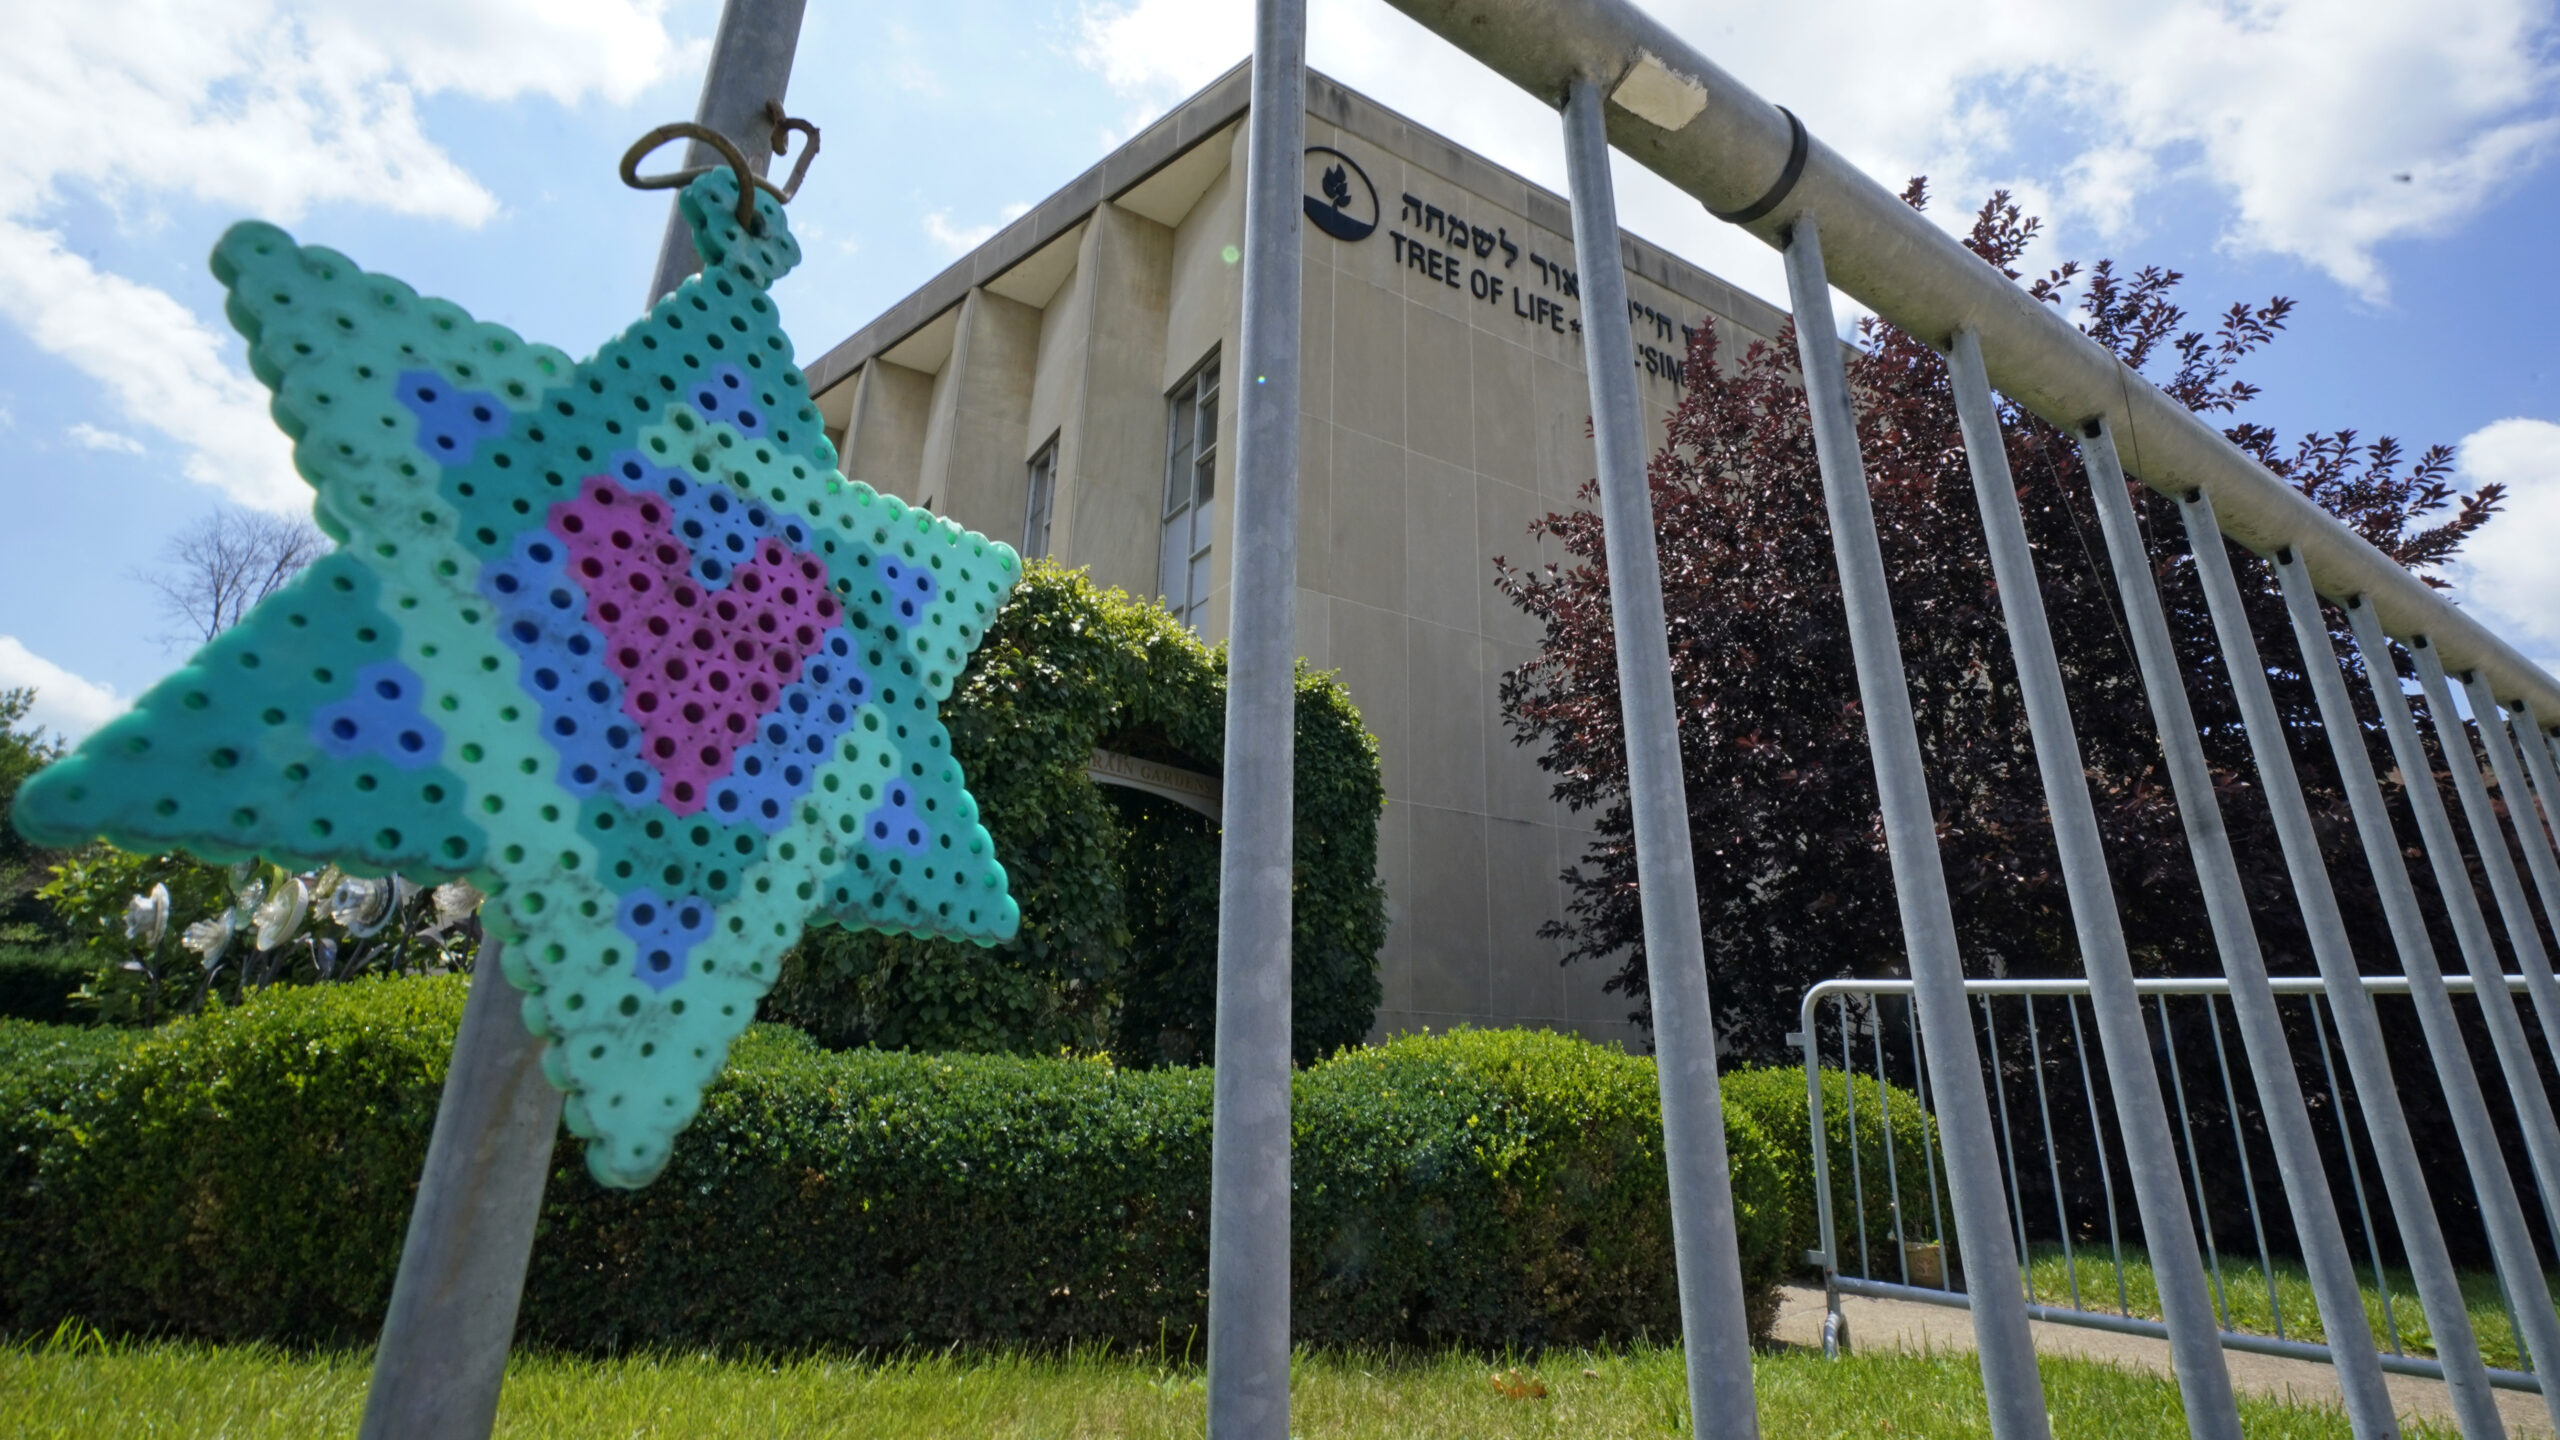 A Star of David hangs from a fence outside the dormant landmark Tree of Life synagogue in Pittsburg...